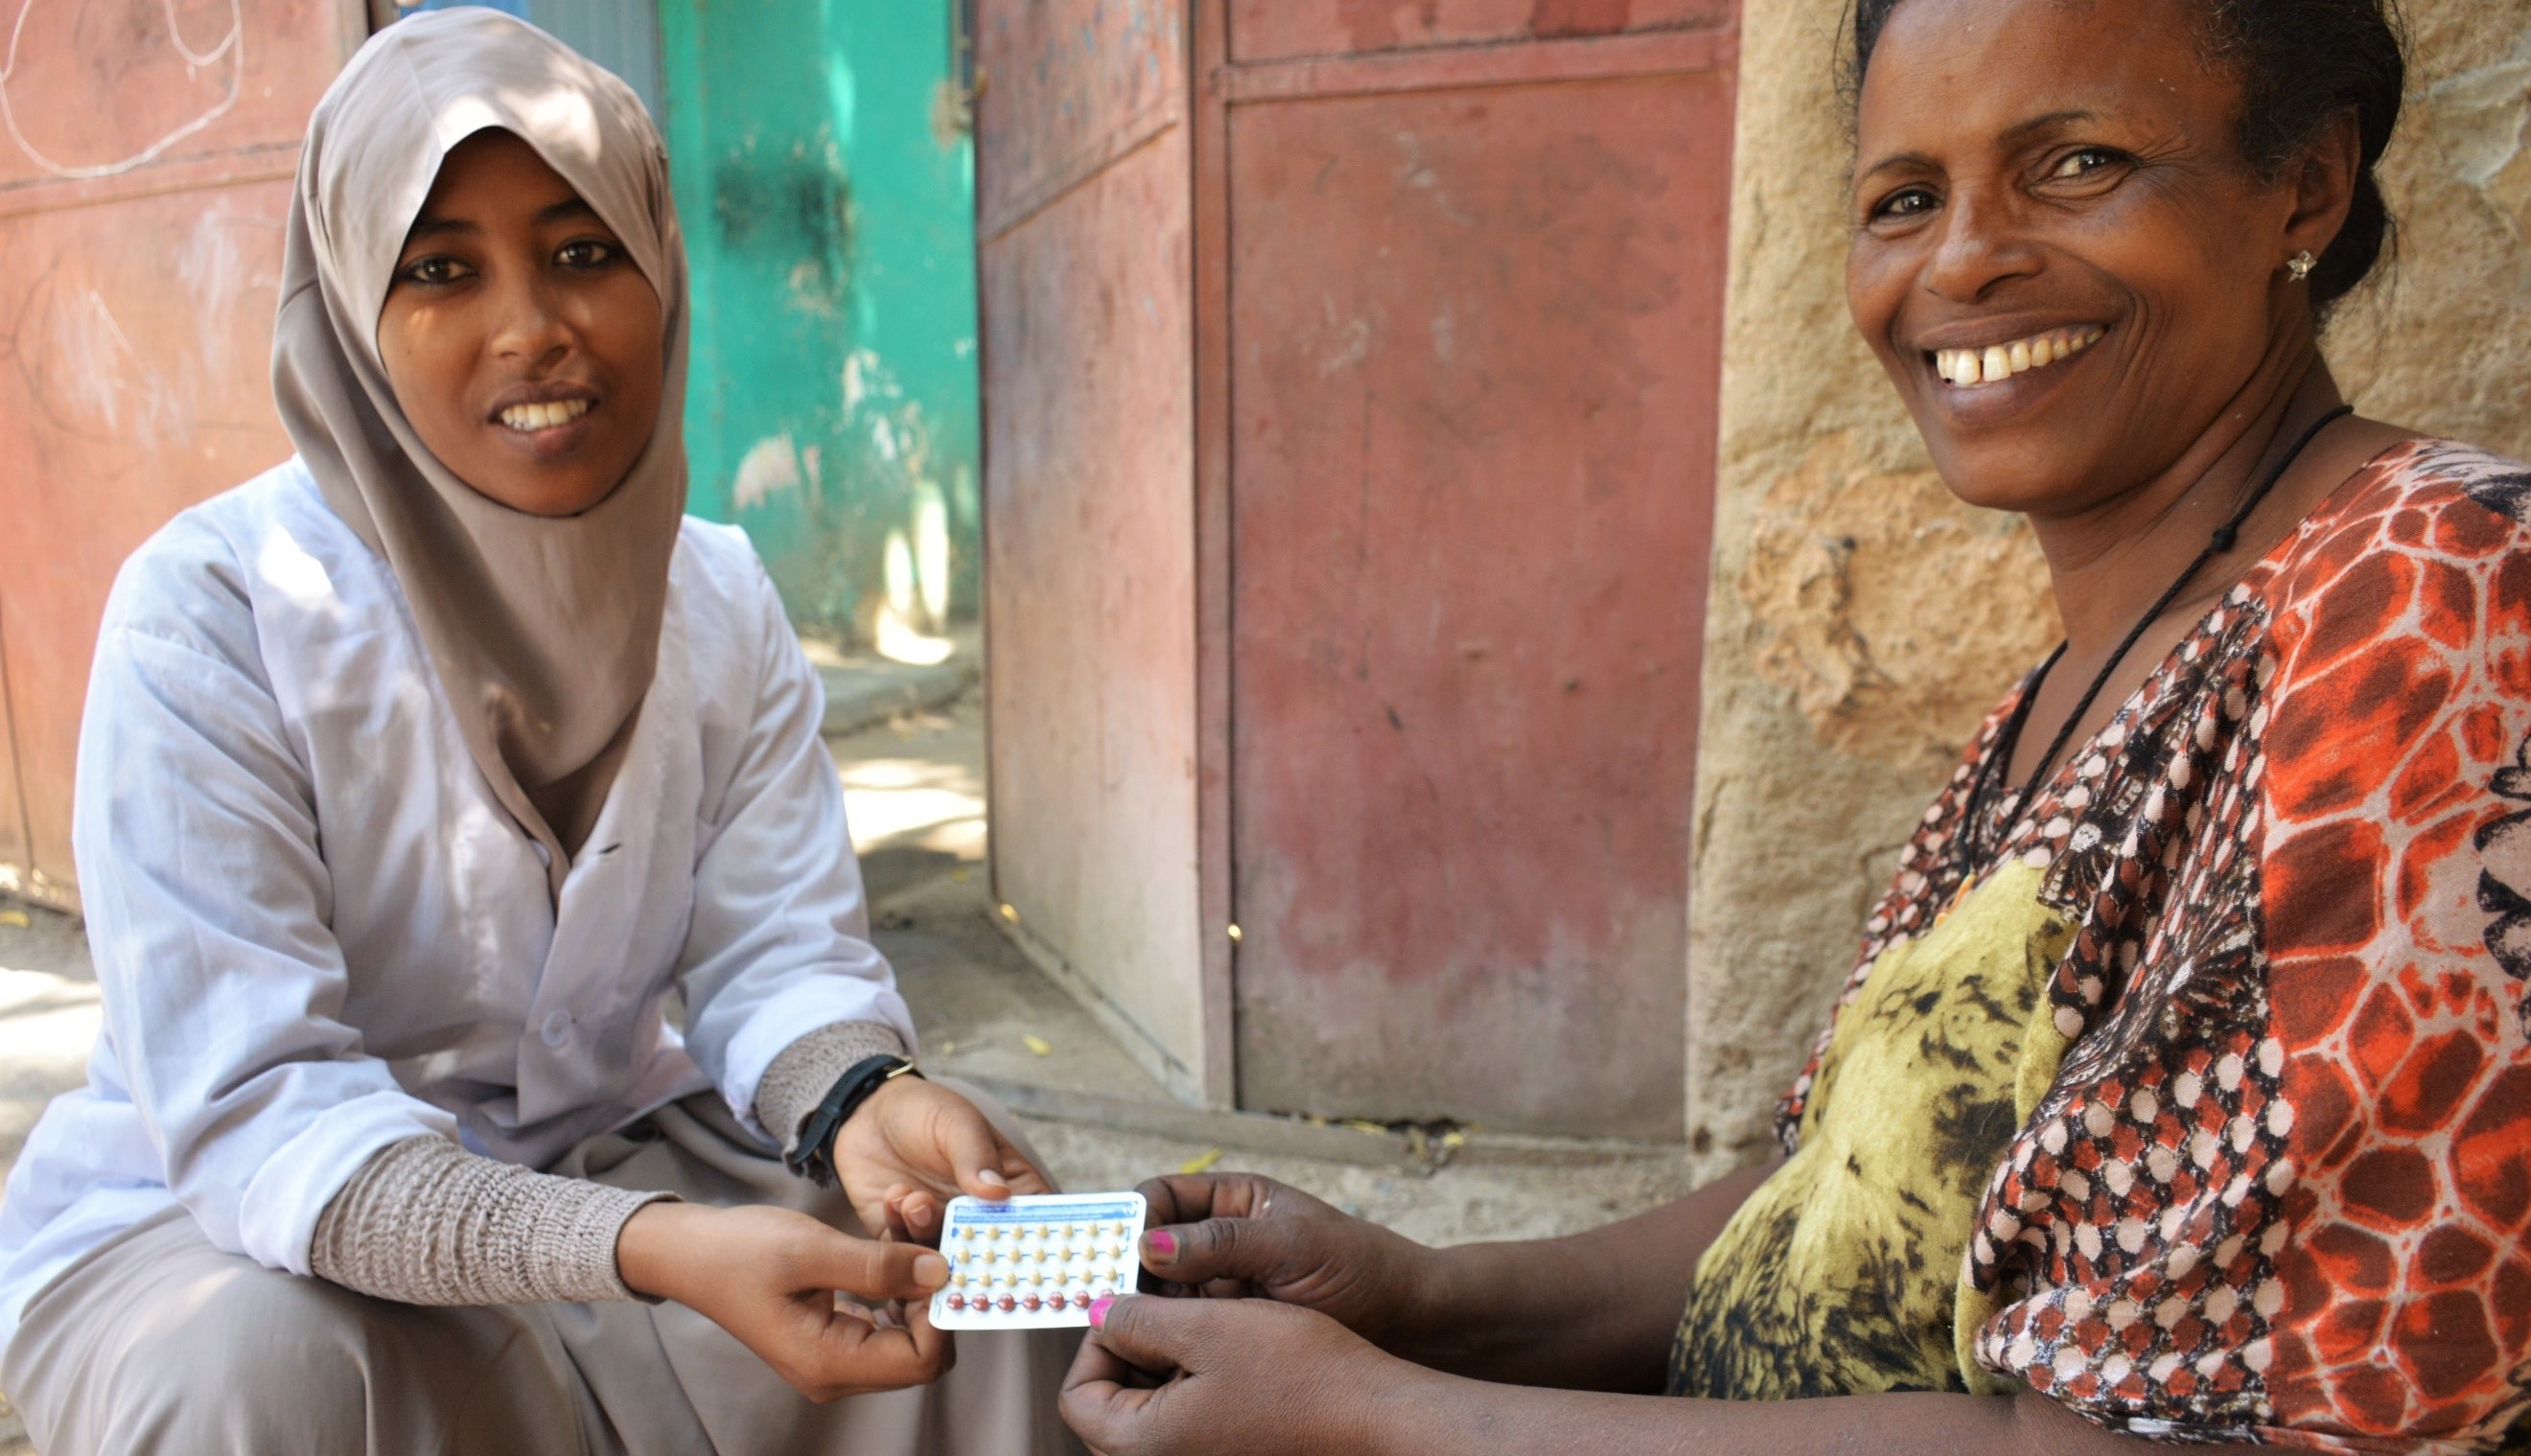 Clinician Zebiba Abdizein (left) and family planning client Mulu Feke (right) chat about family planning services